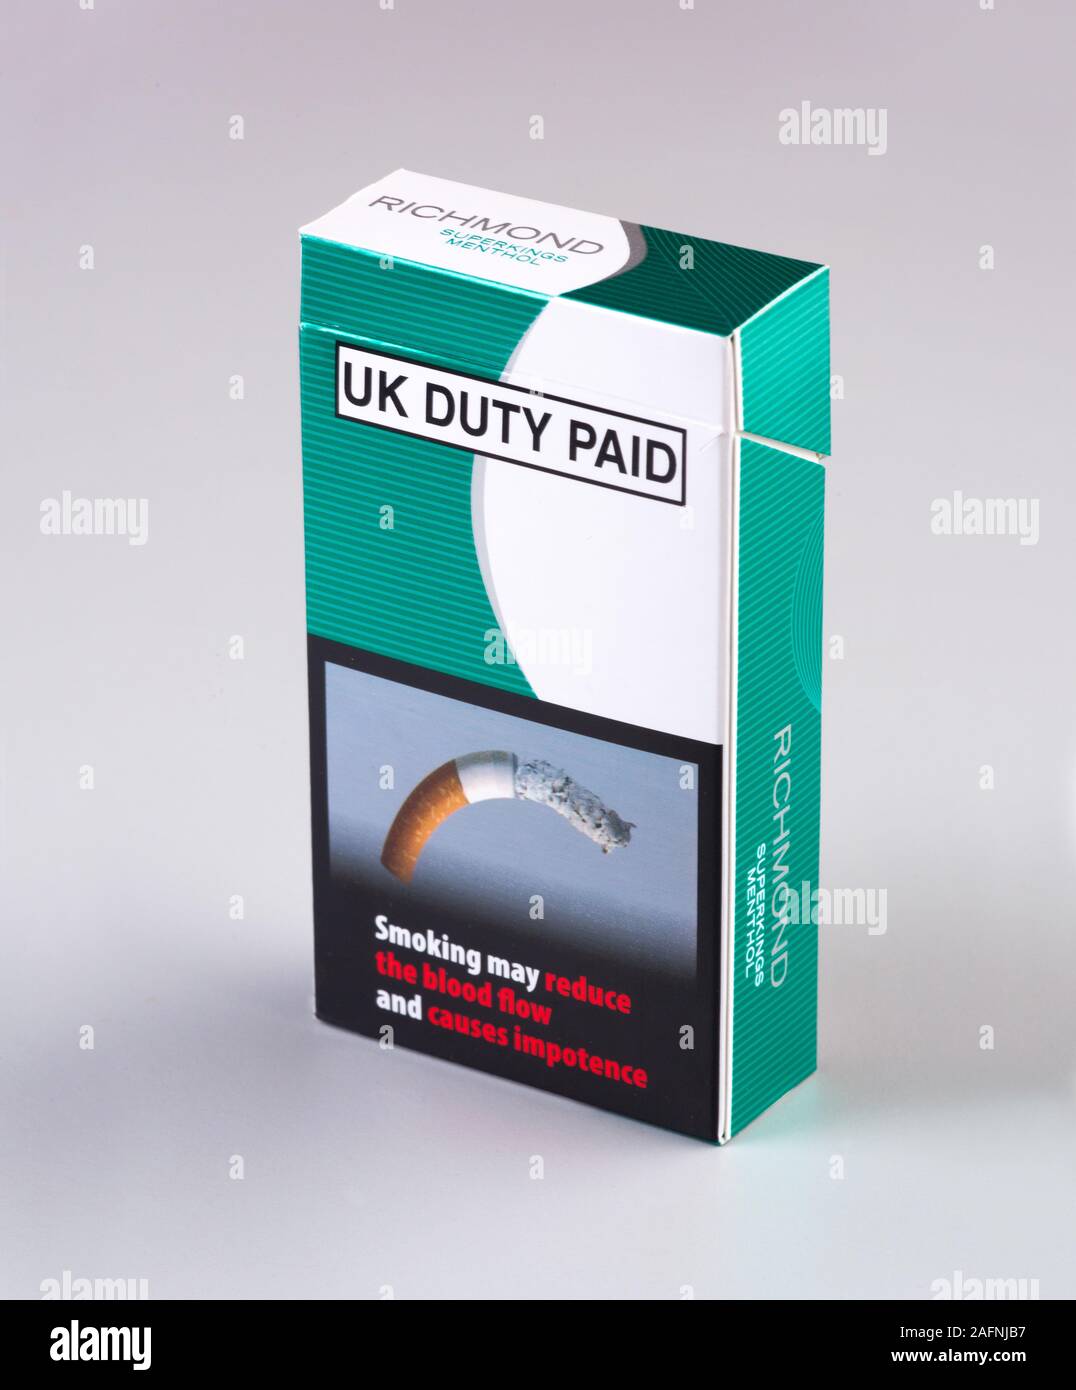 UK Duty paid text on cigarette pack Stock Photo